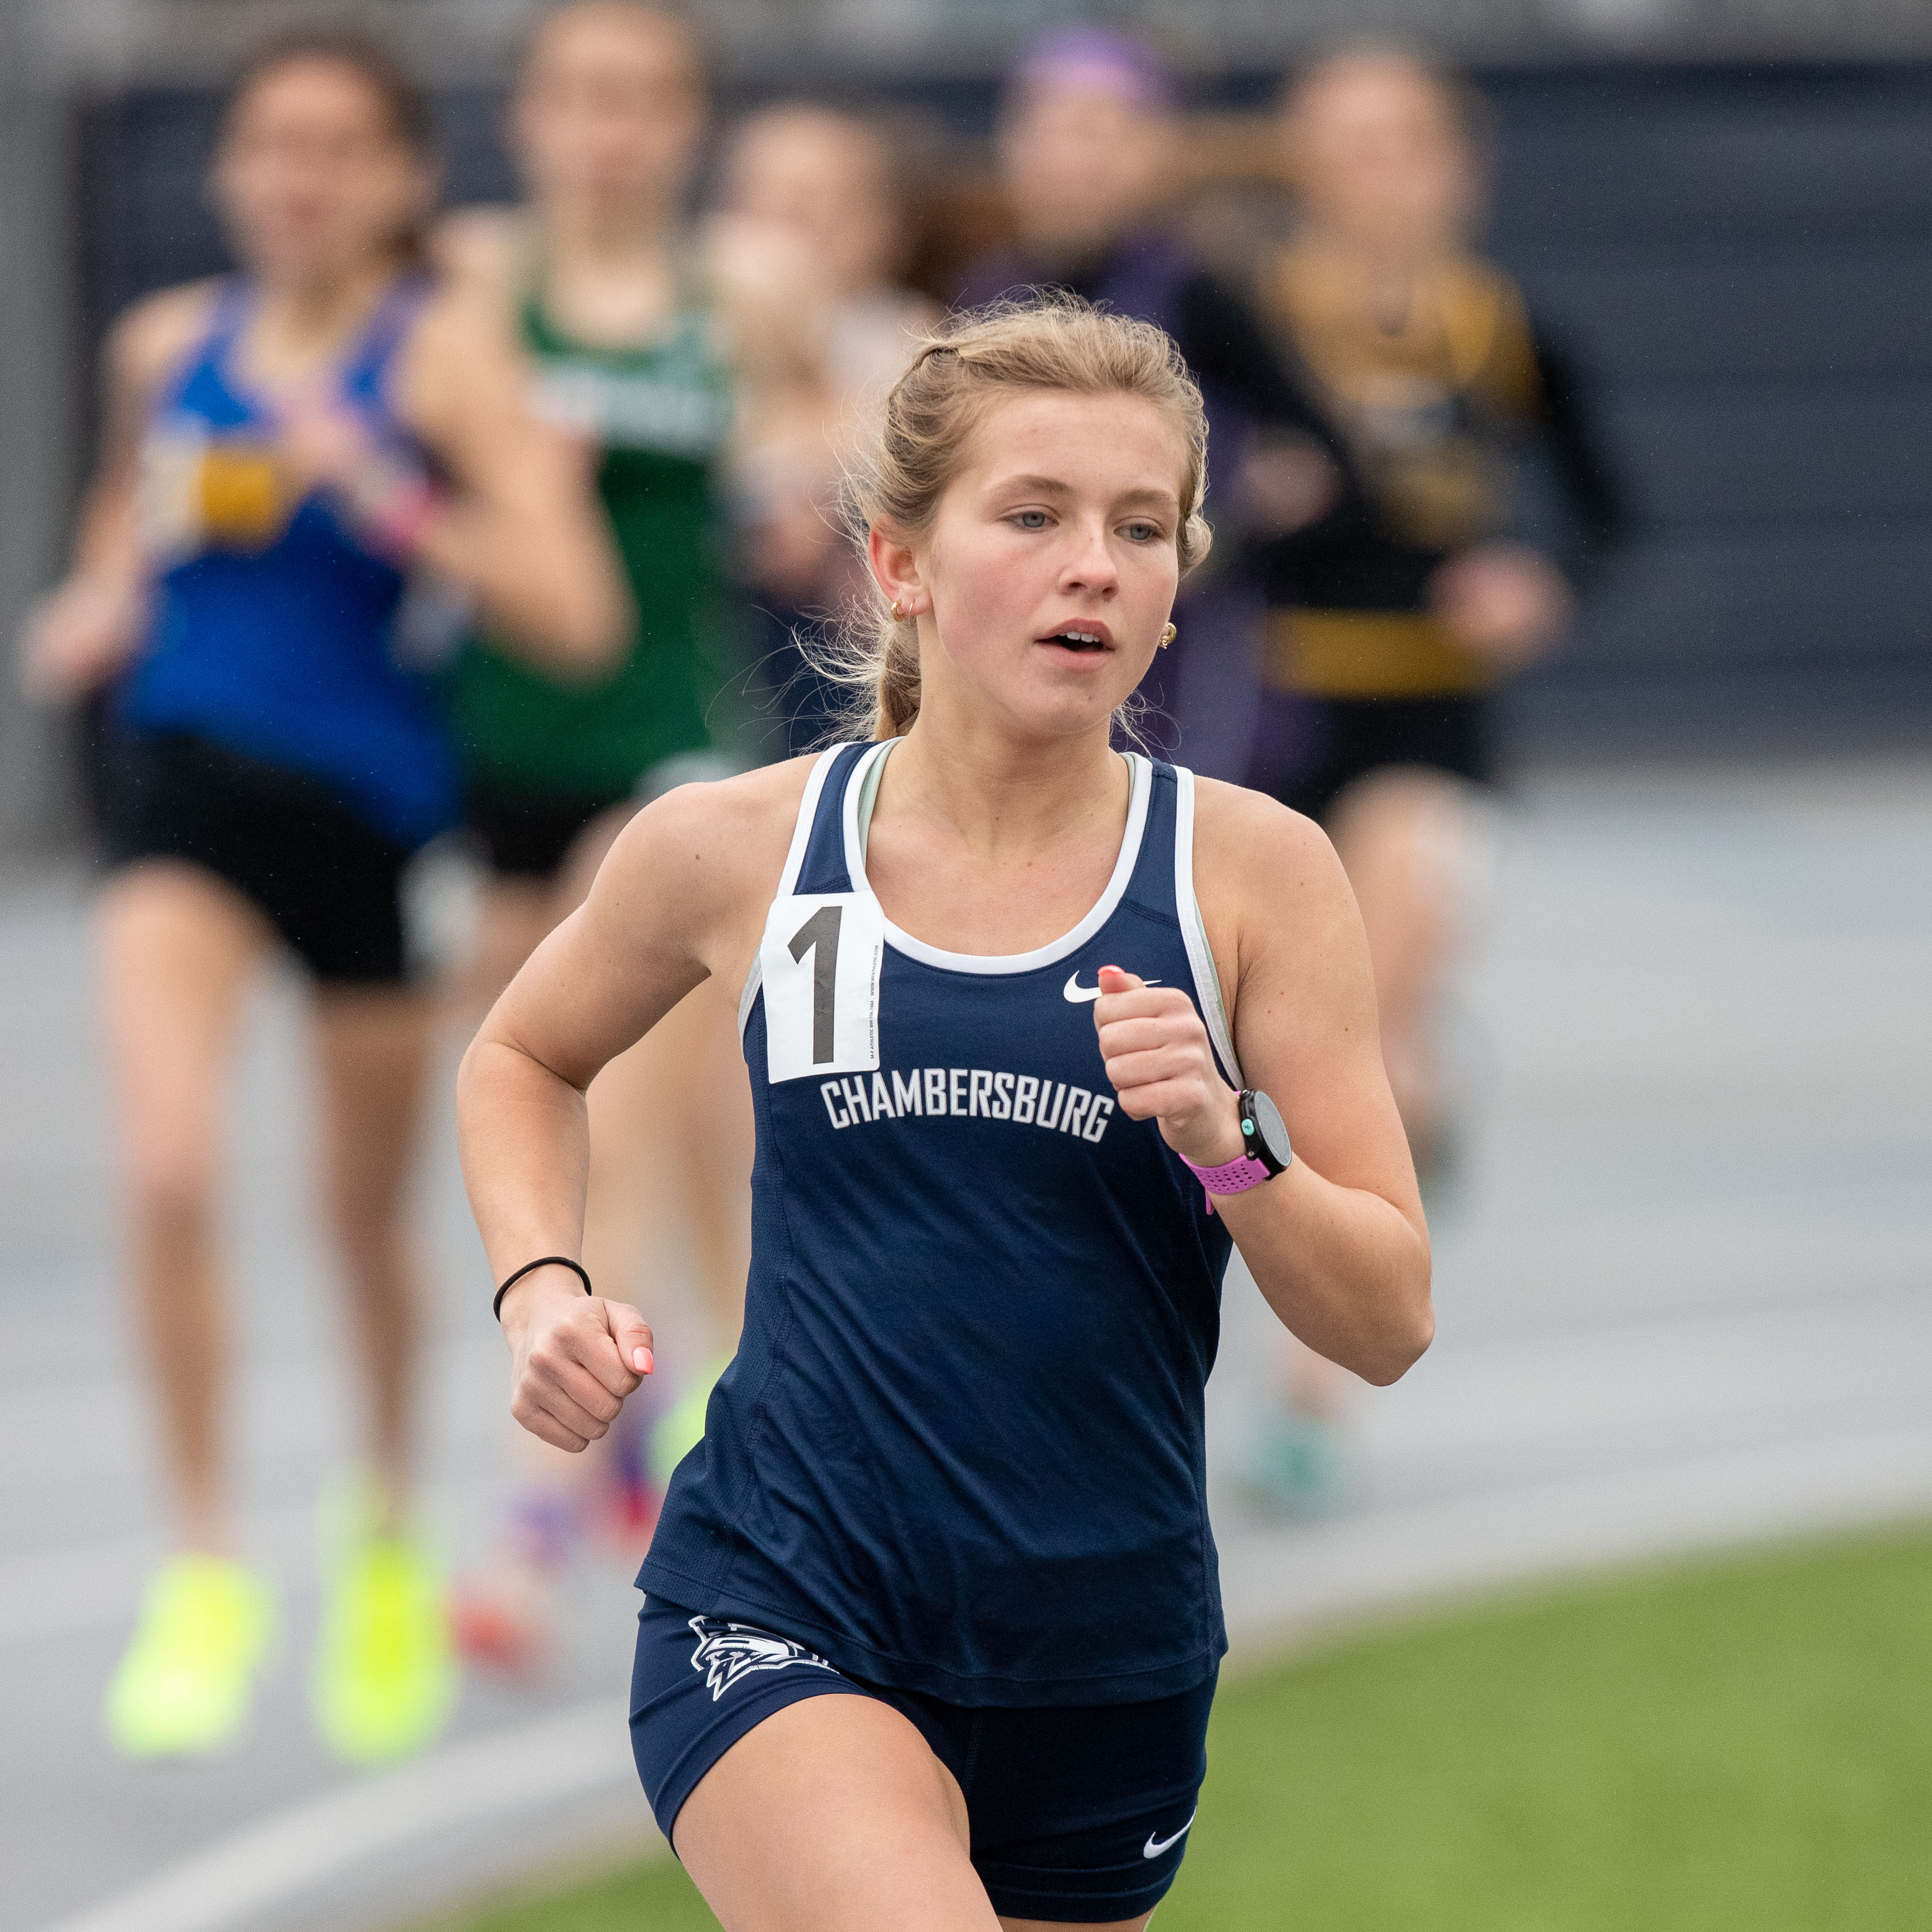 Cameryn Kiser, Chambersburg, wins the 1600 meter run with a time of 5:24.93, at the 2023 Tim Cook Memorial Invitational track & field meet at Chambersburg, Pa., Mar. 25, 2023.Mark Pynes | pennlive.com